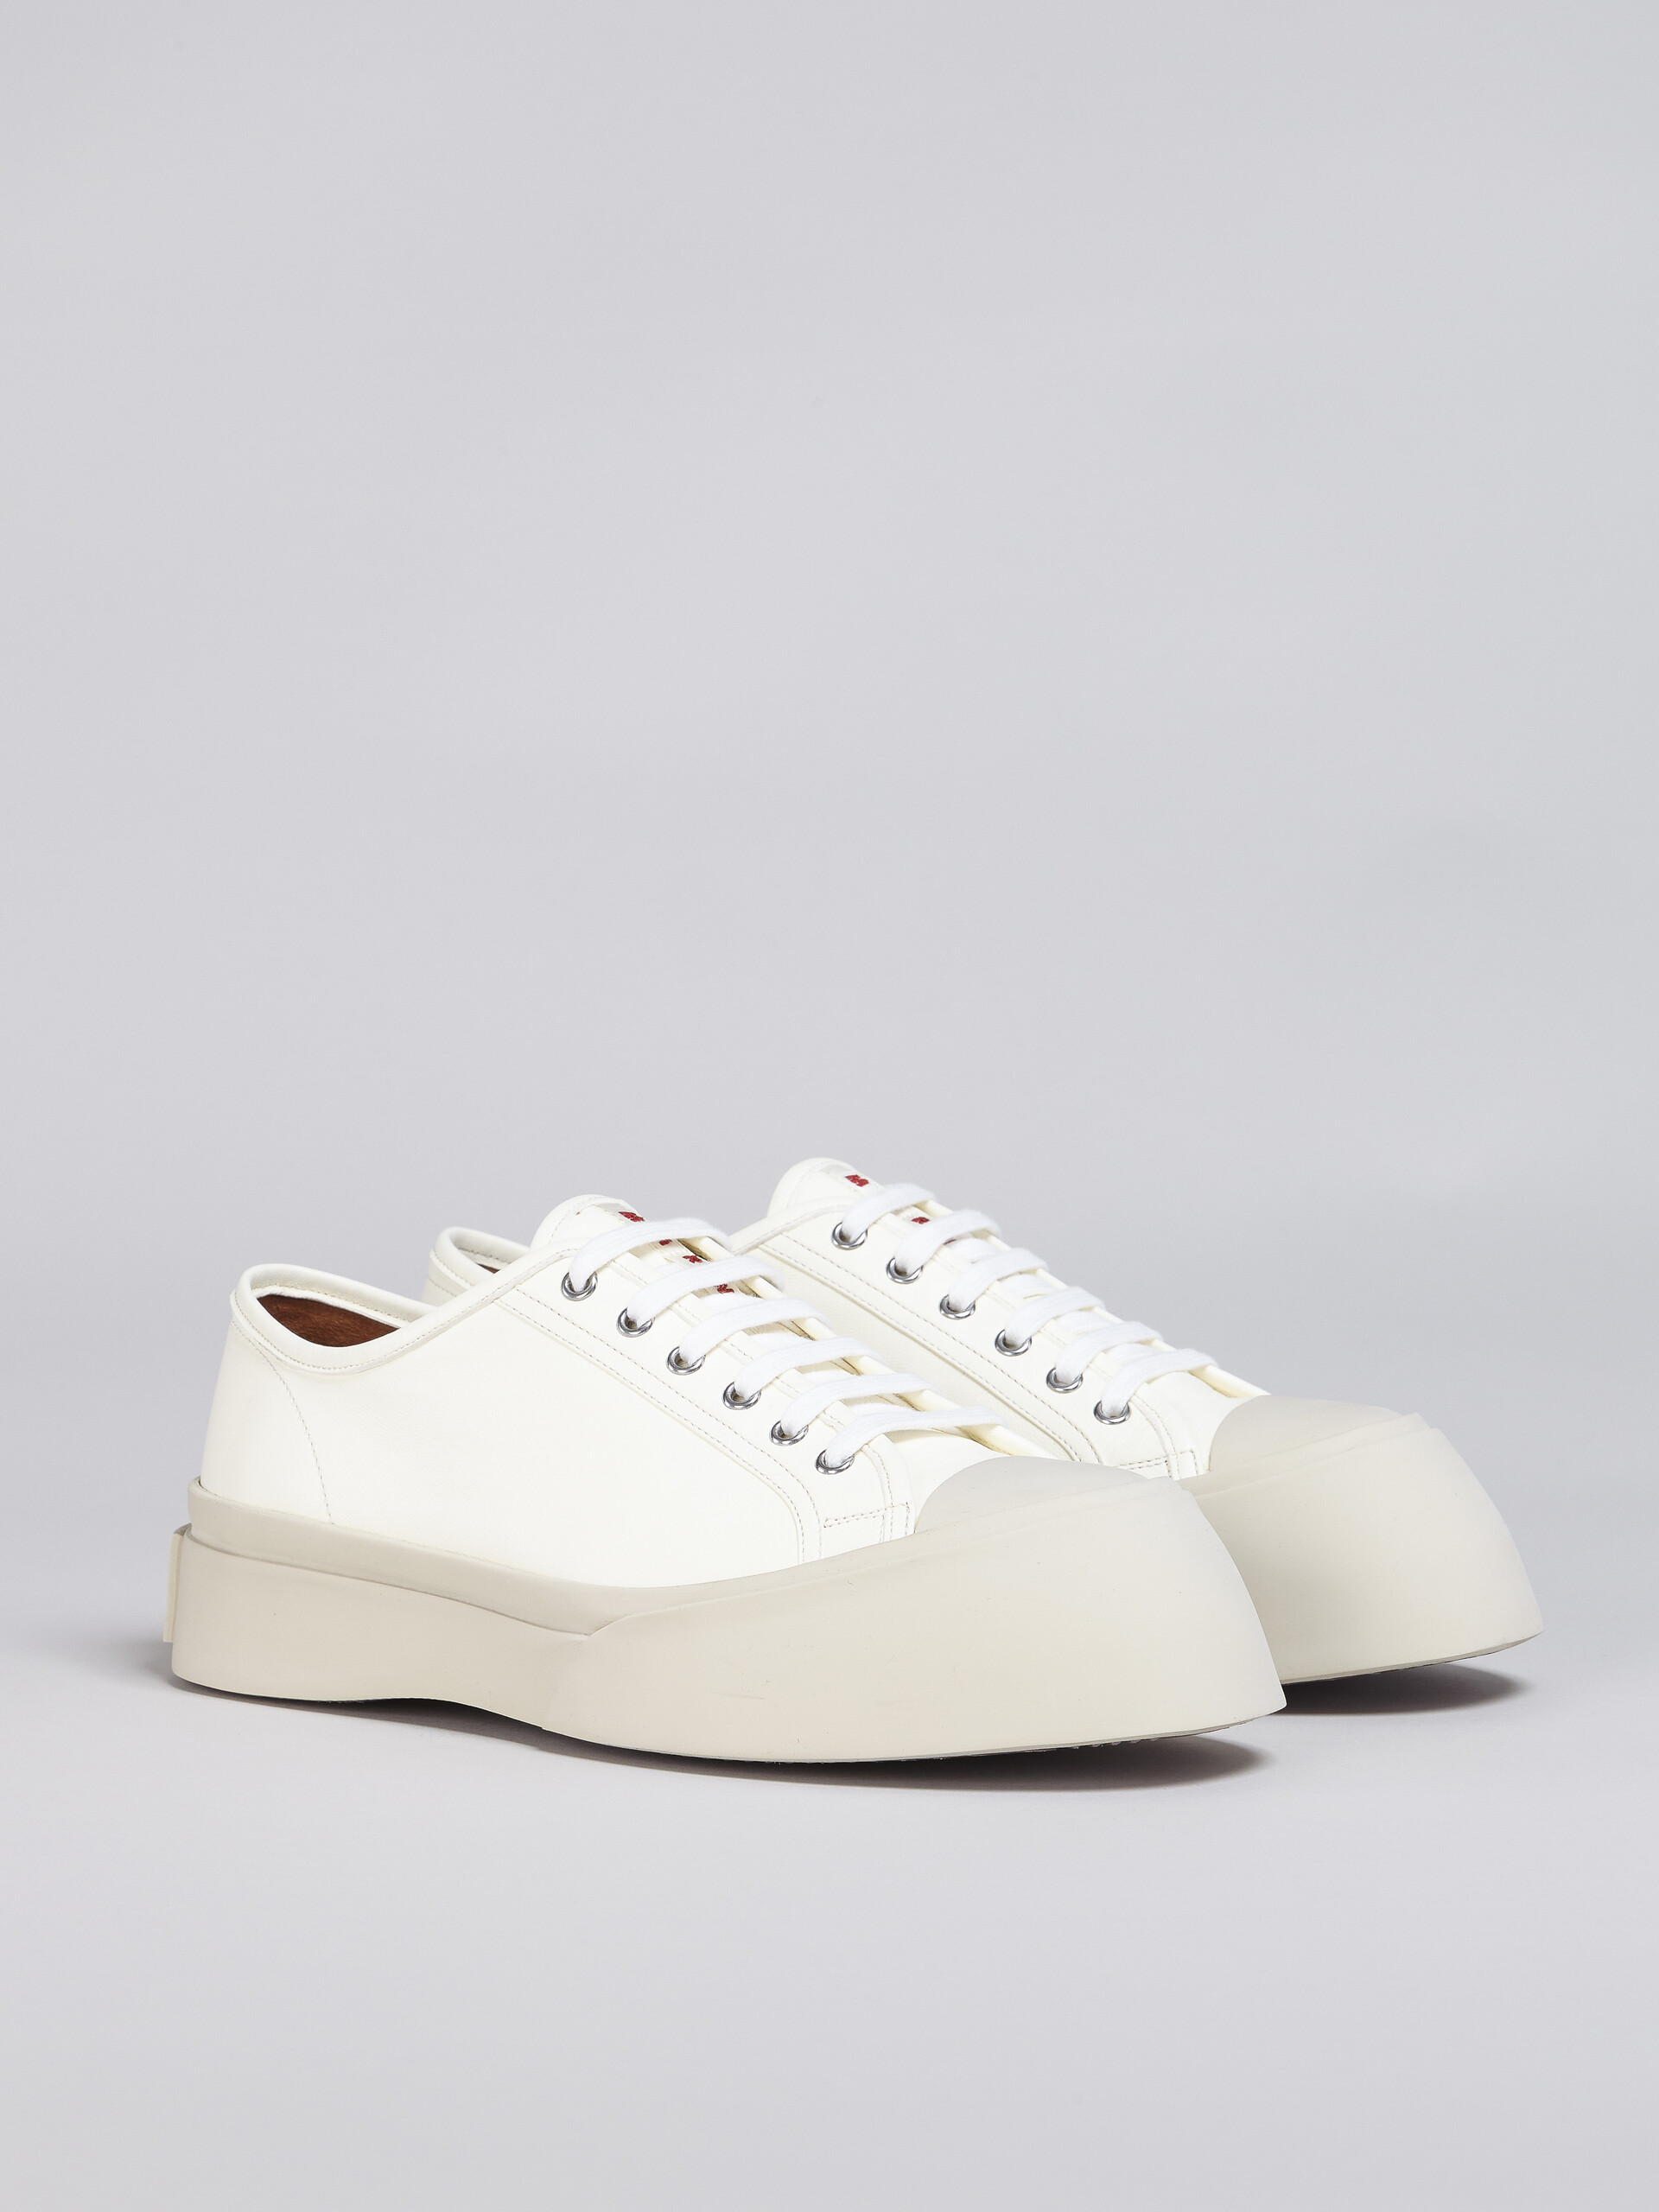 Blue nappa leather Pablo sneaker - Sneakers - Image 2